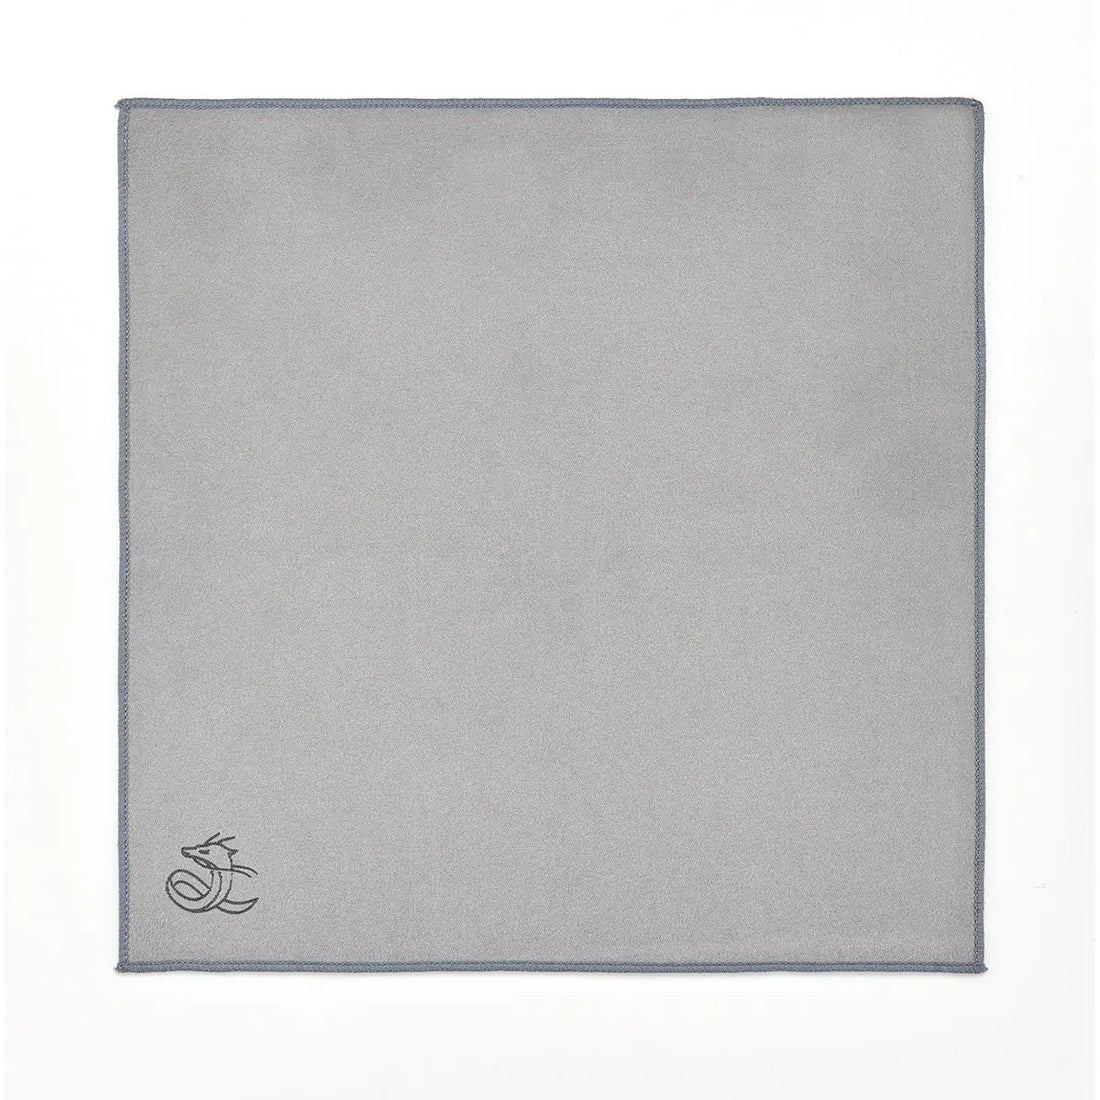 Chihiros Double-sided Tank Cleaning Cloth - Chihiros Aquatic Studio